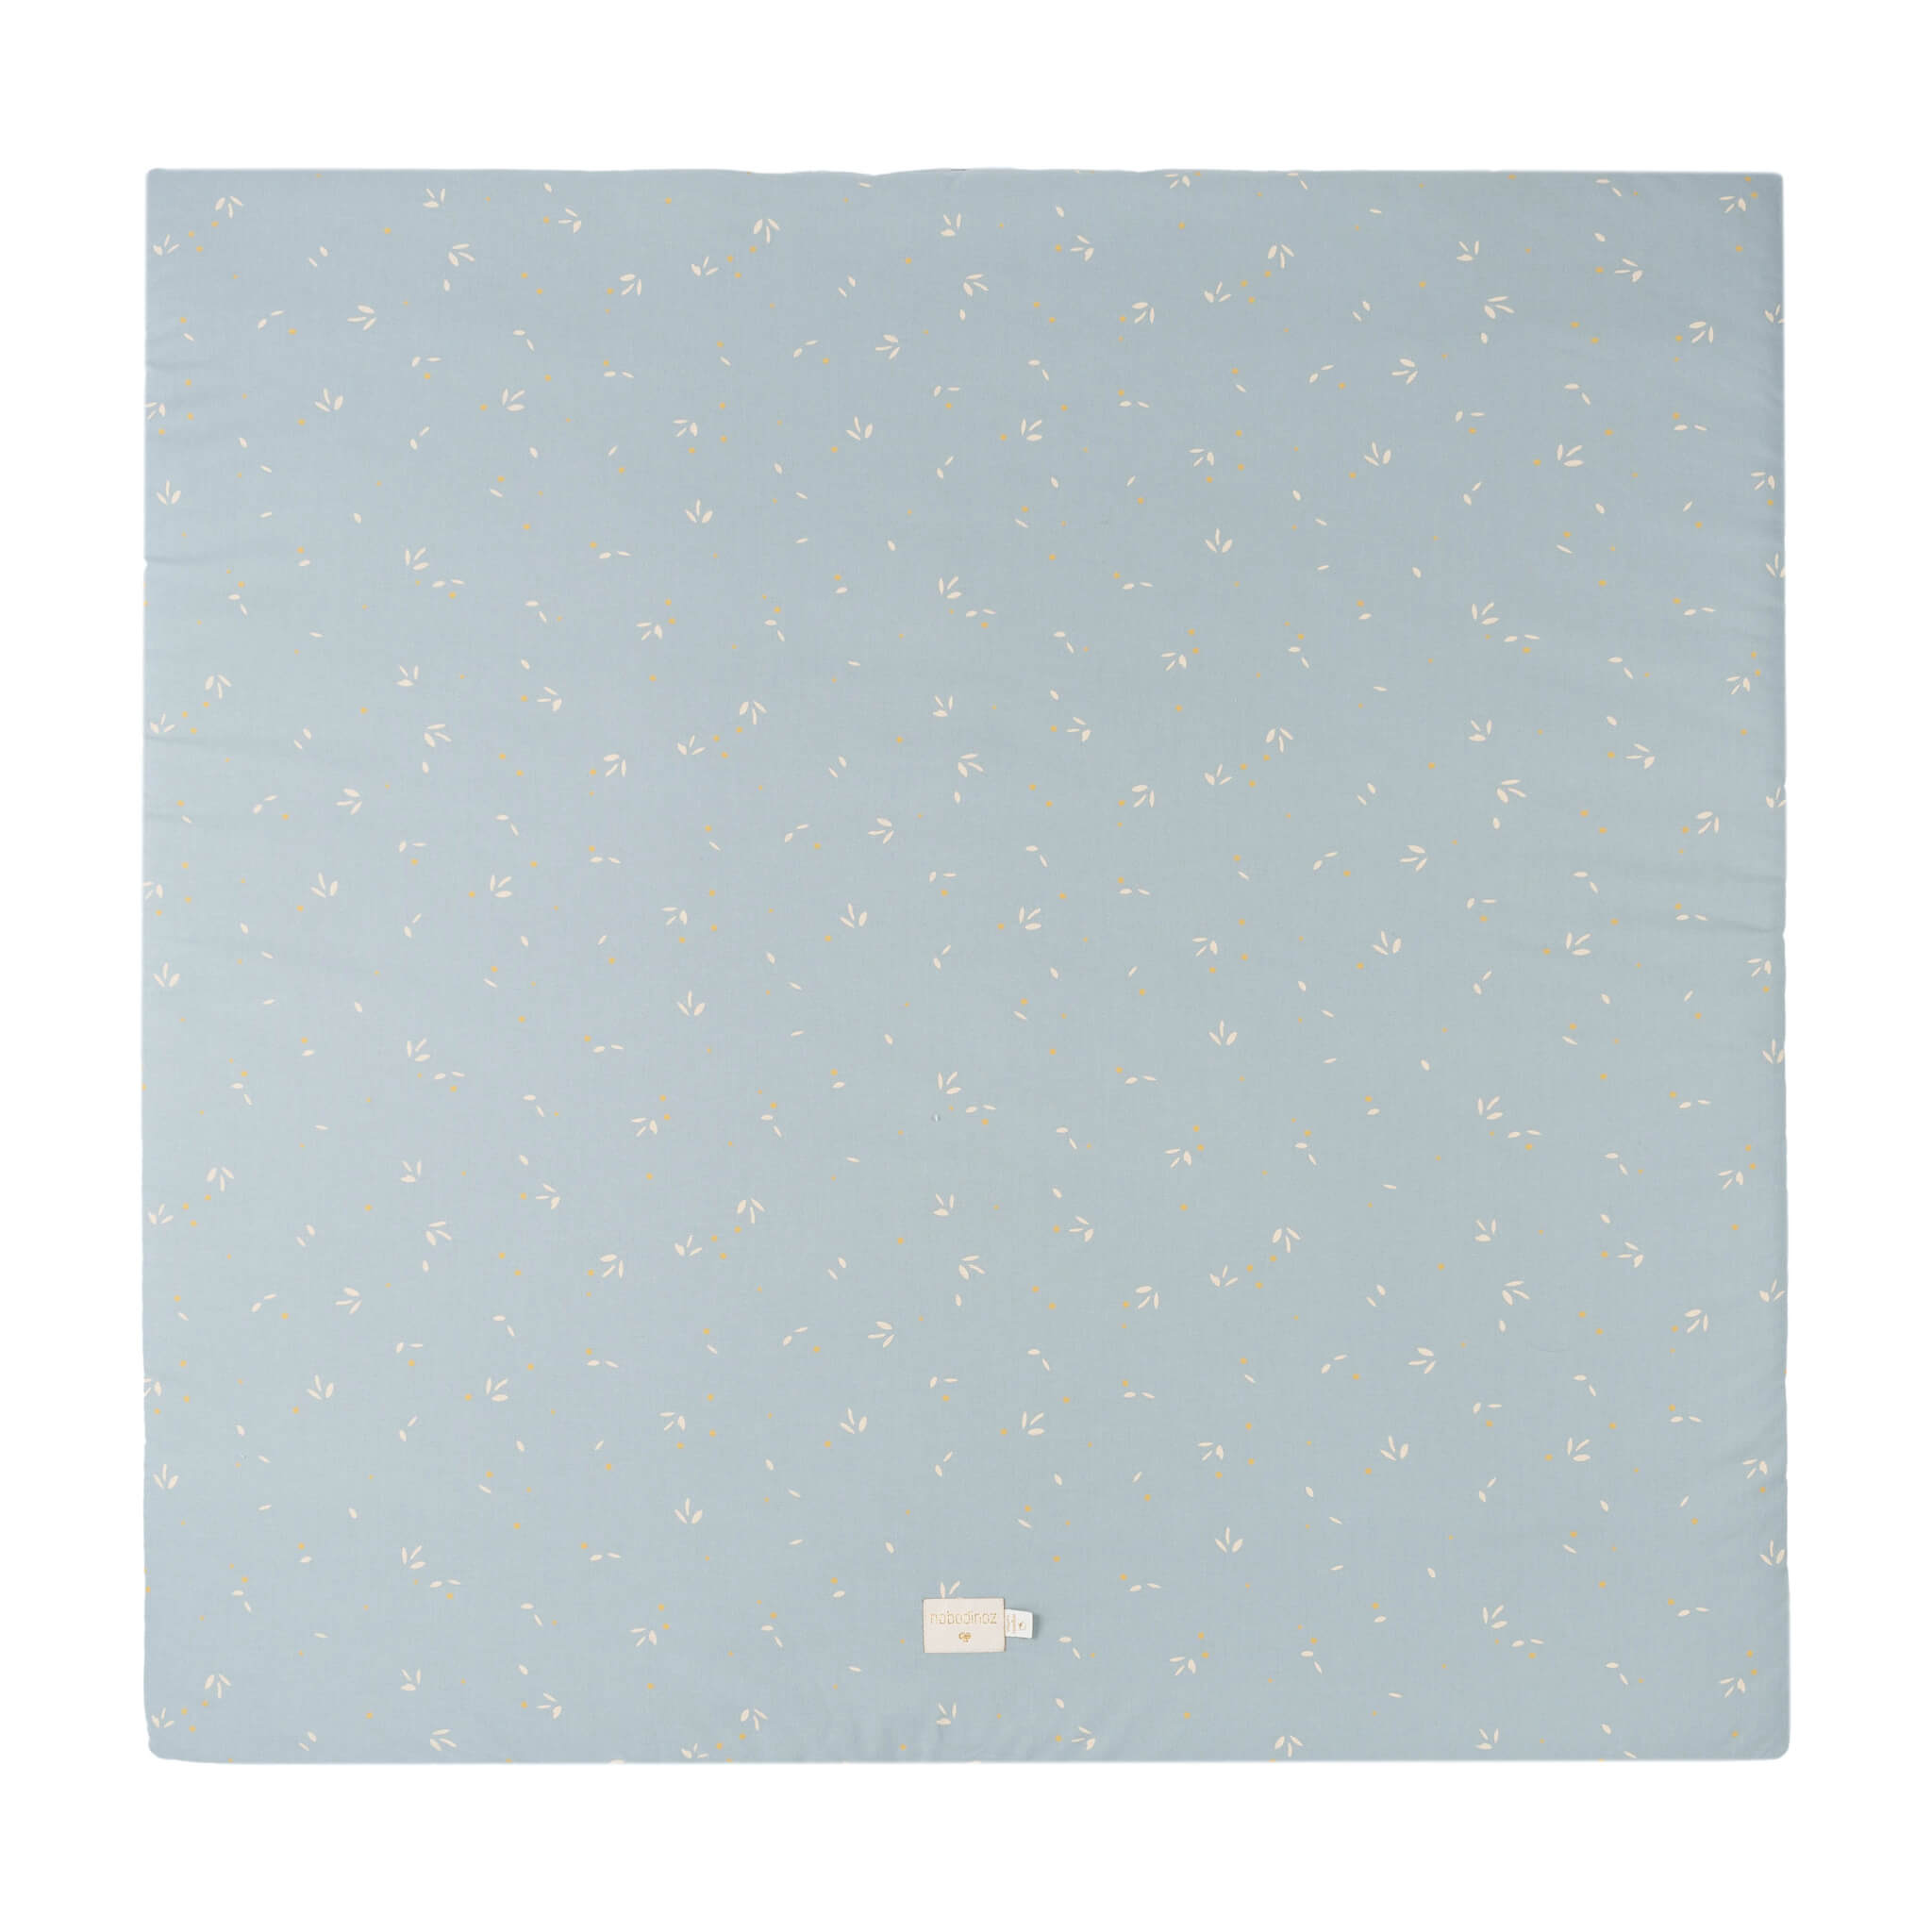 Nobodinoz Colorado Square Playmat in Willow Soft Blue